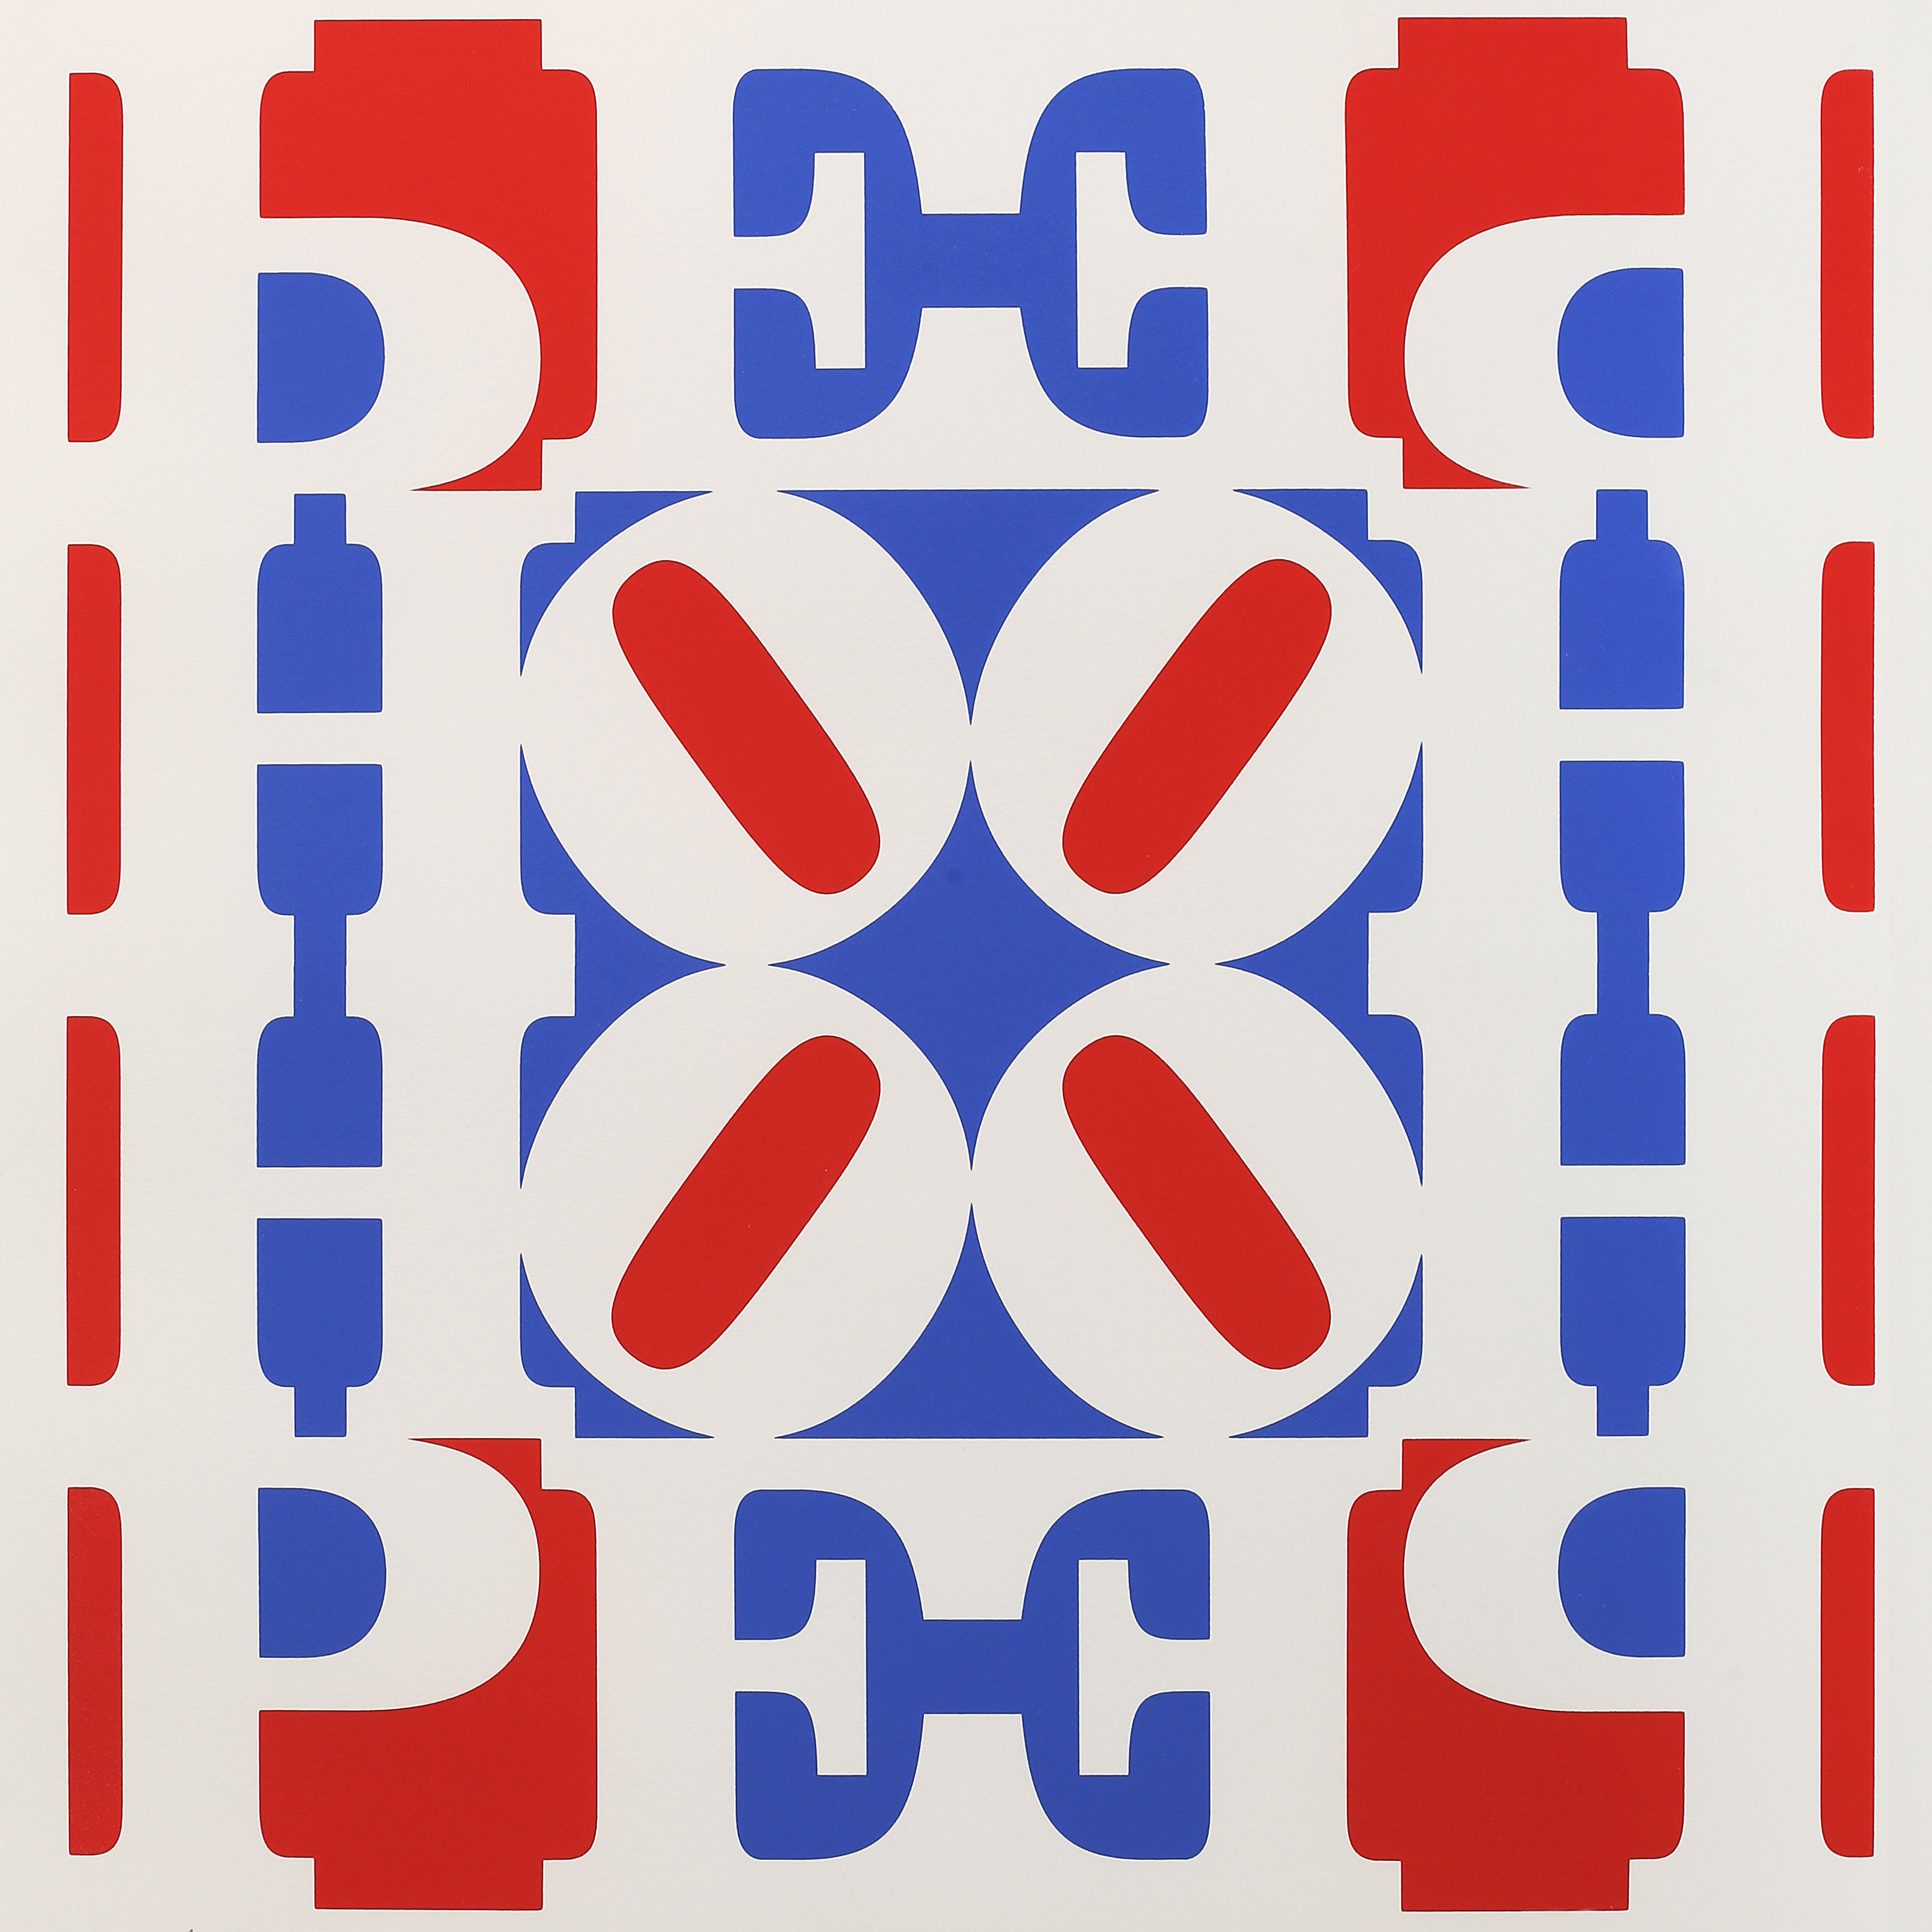 Robert Indiana, HOPE Wall, (Red_White_Blue), 2010, Silkscreen on paper, Edition of 33, Ed v 61x63,5